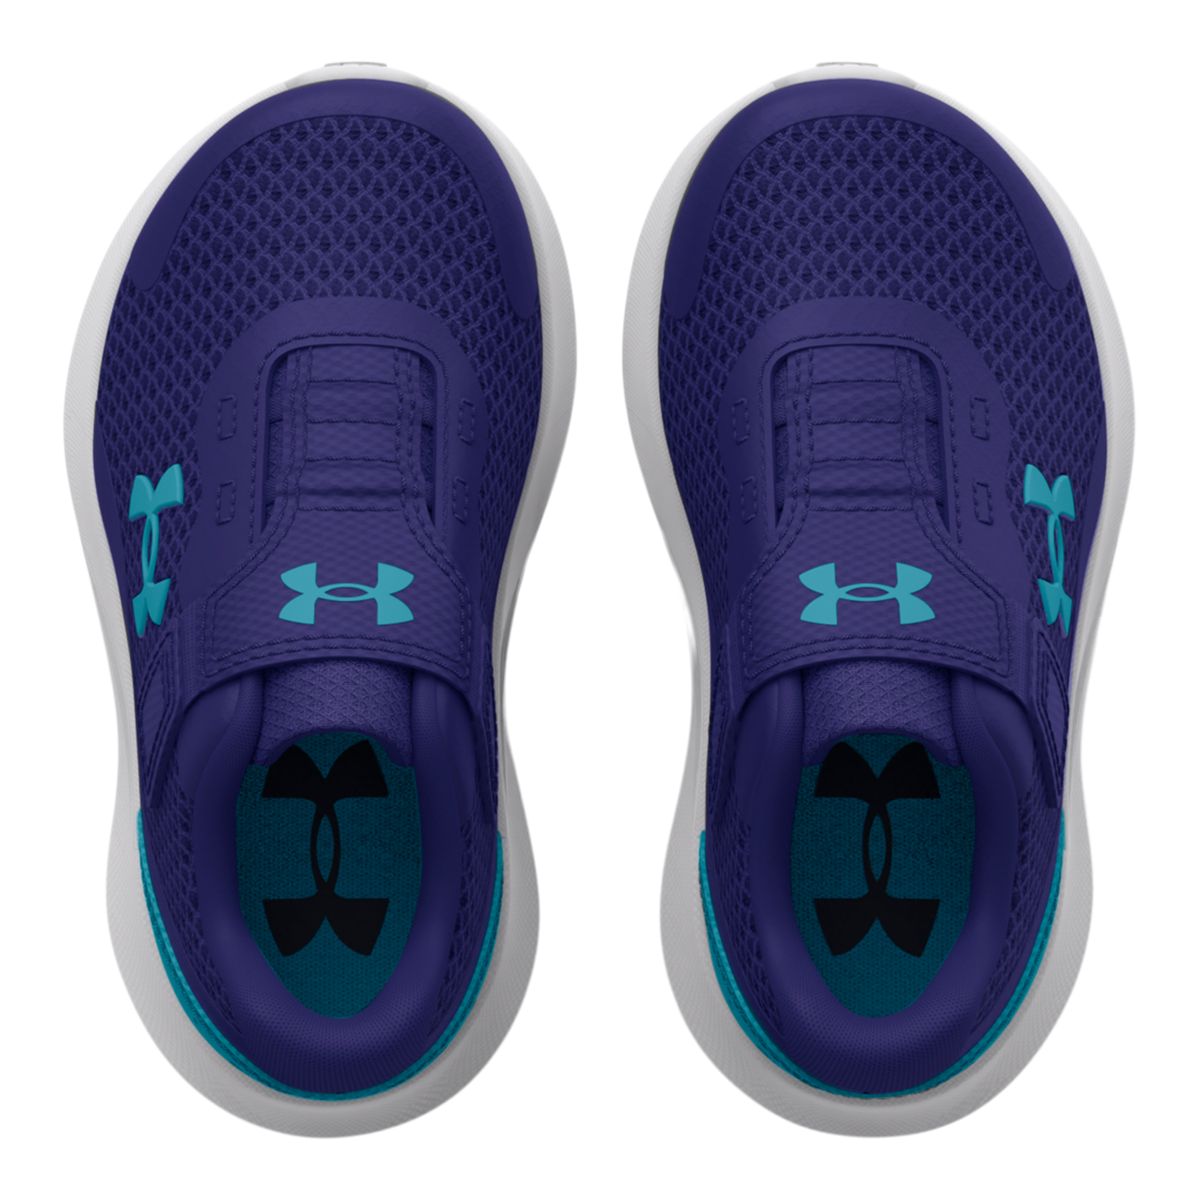 Under Armour Girls' Surge 3 Lace-Up Running Shoes (Youth)